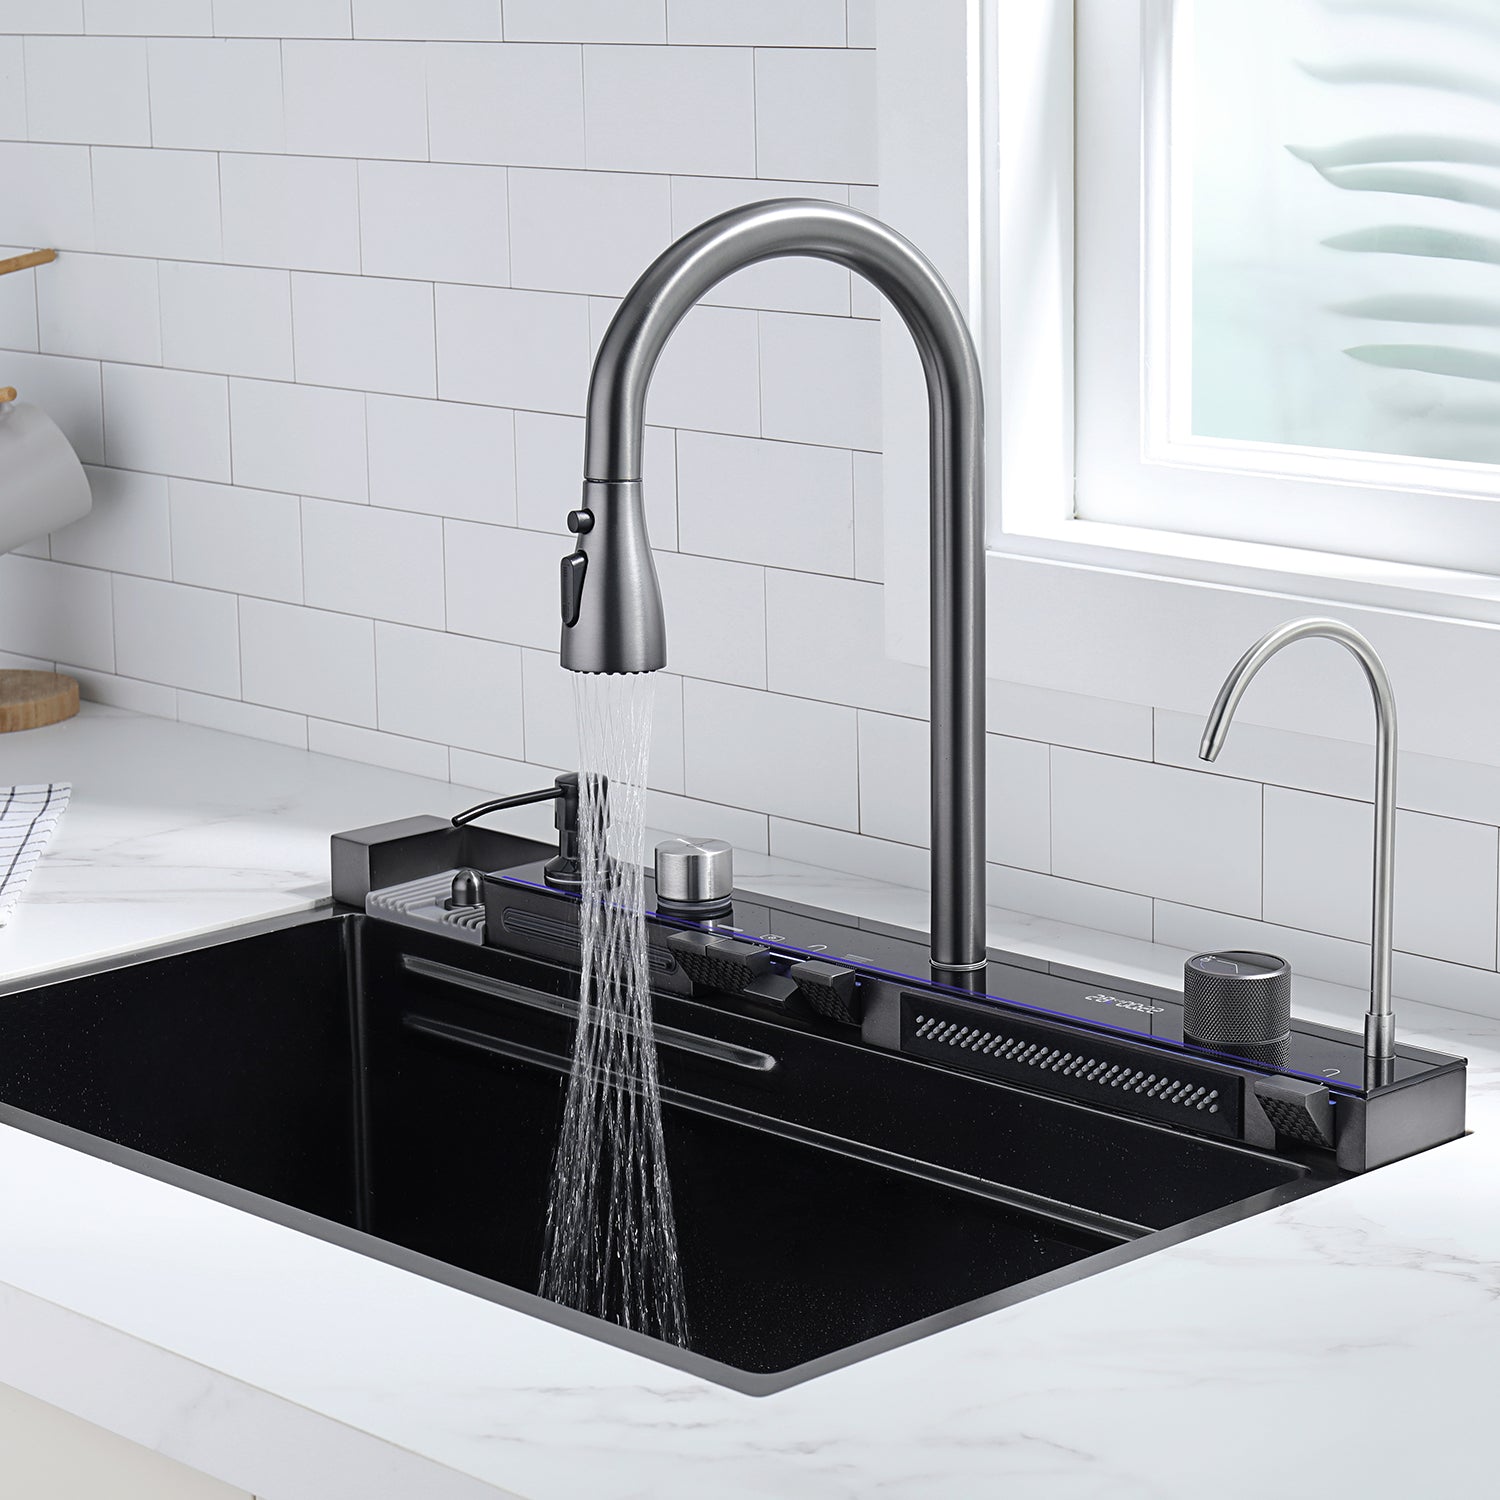 Lefton Two Waterfall Faucets Kitchen Sink with Digital Temperature Display & LED Lighting-KS2206 -Kitchen Sinks- Lefton Home